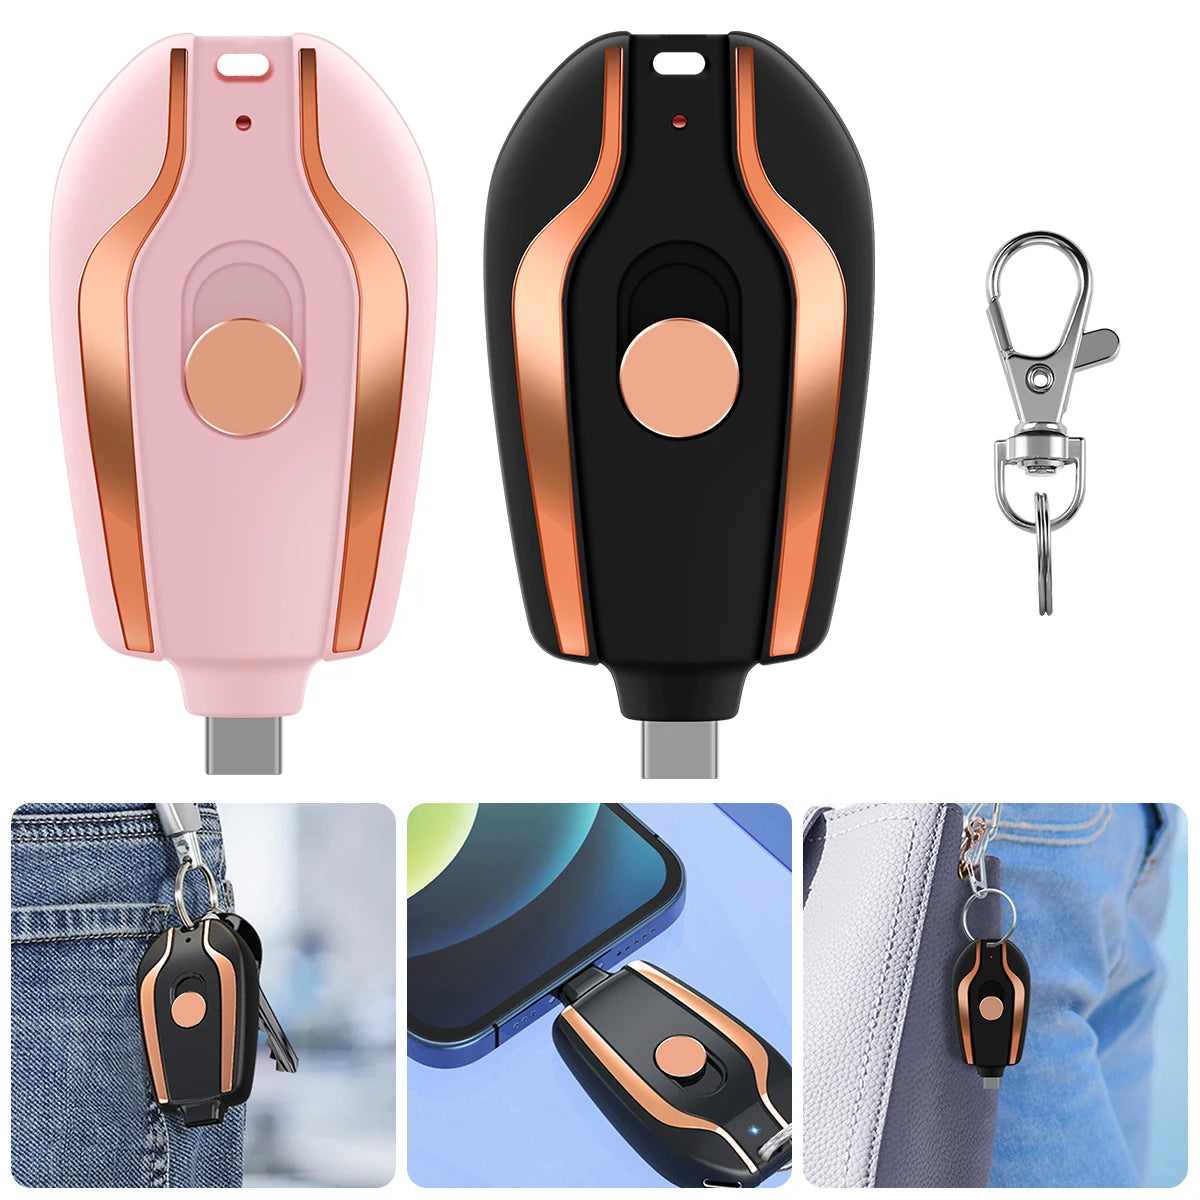 Compact Keychain Phone Charger